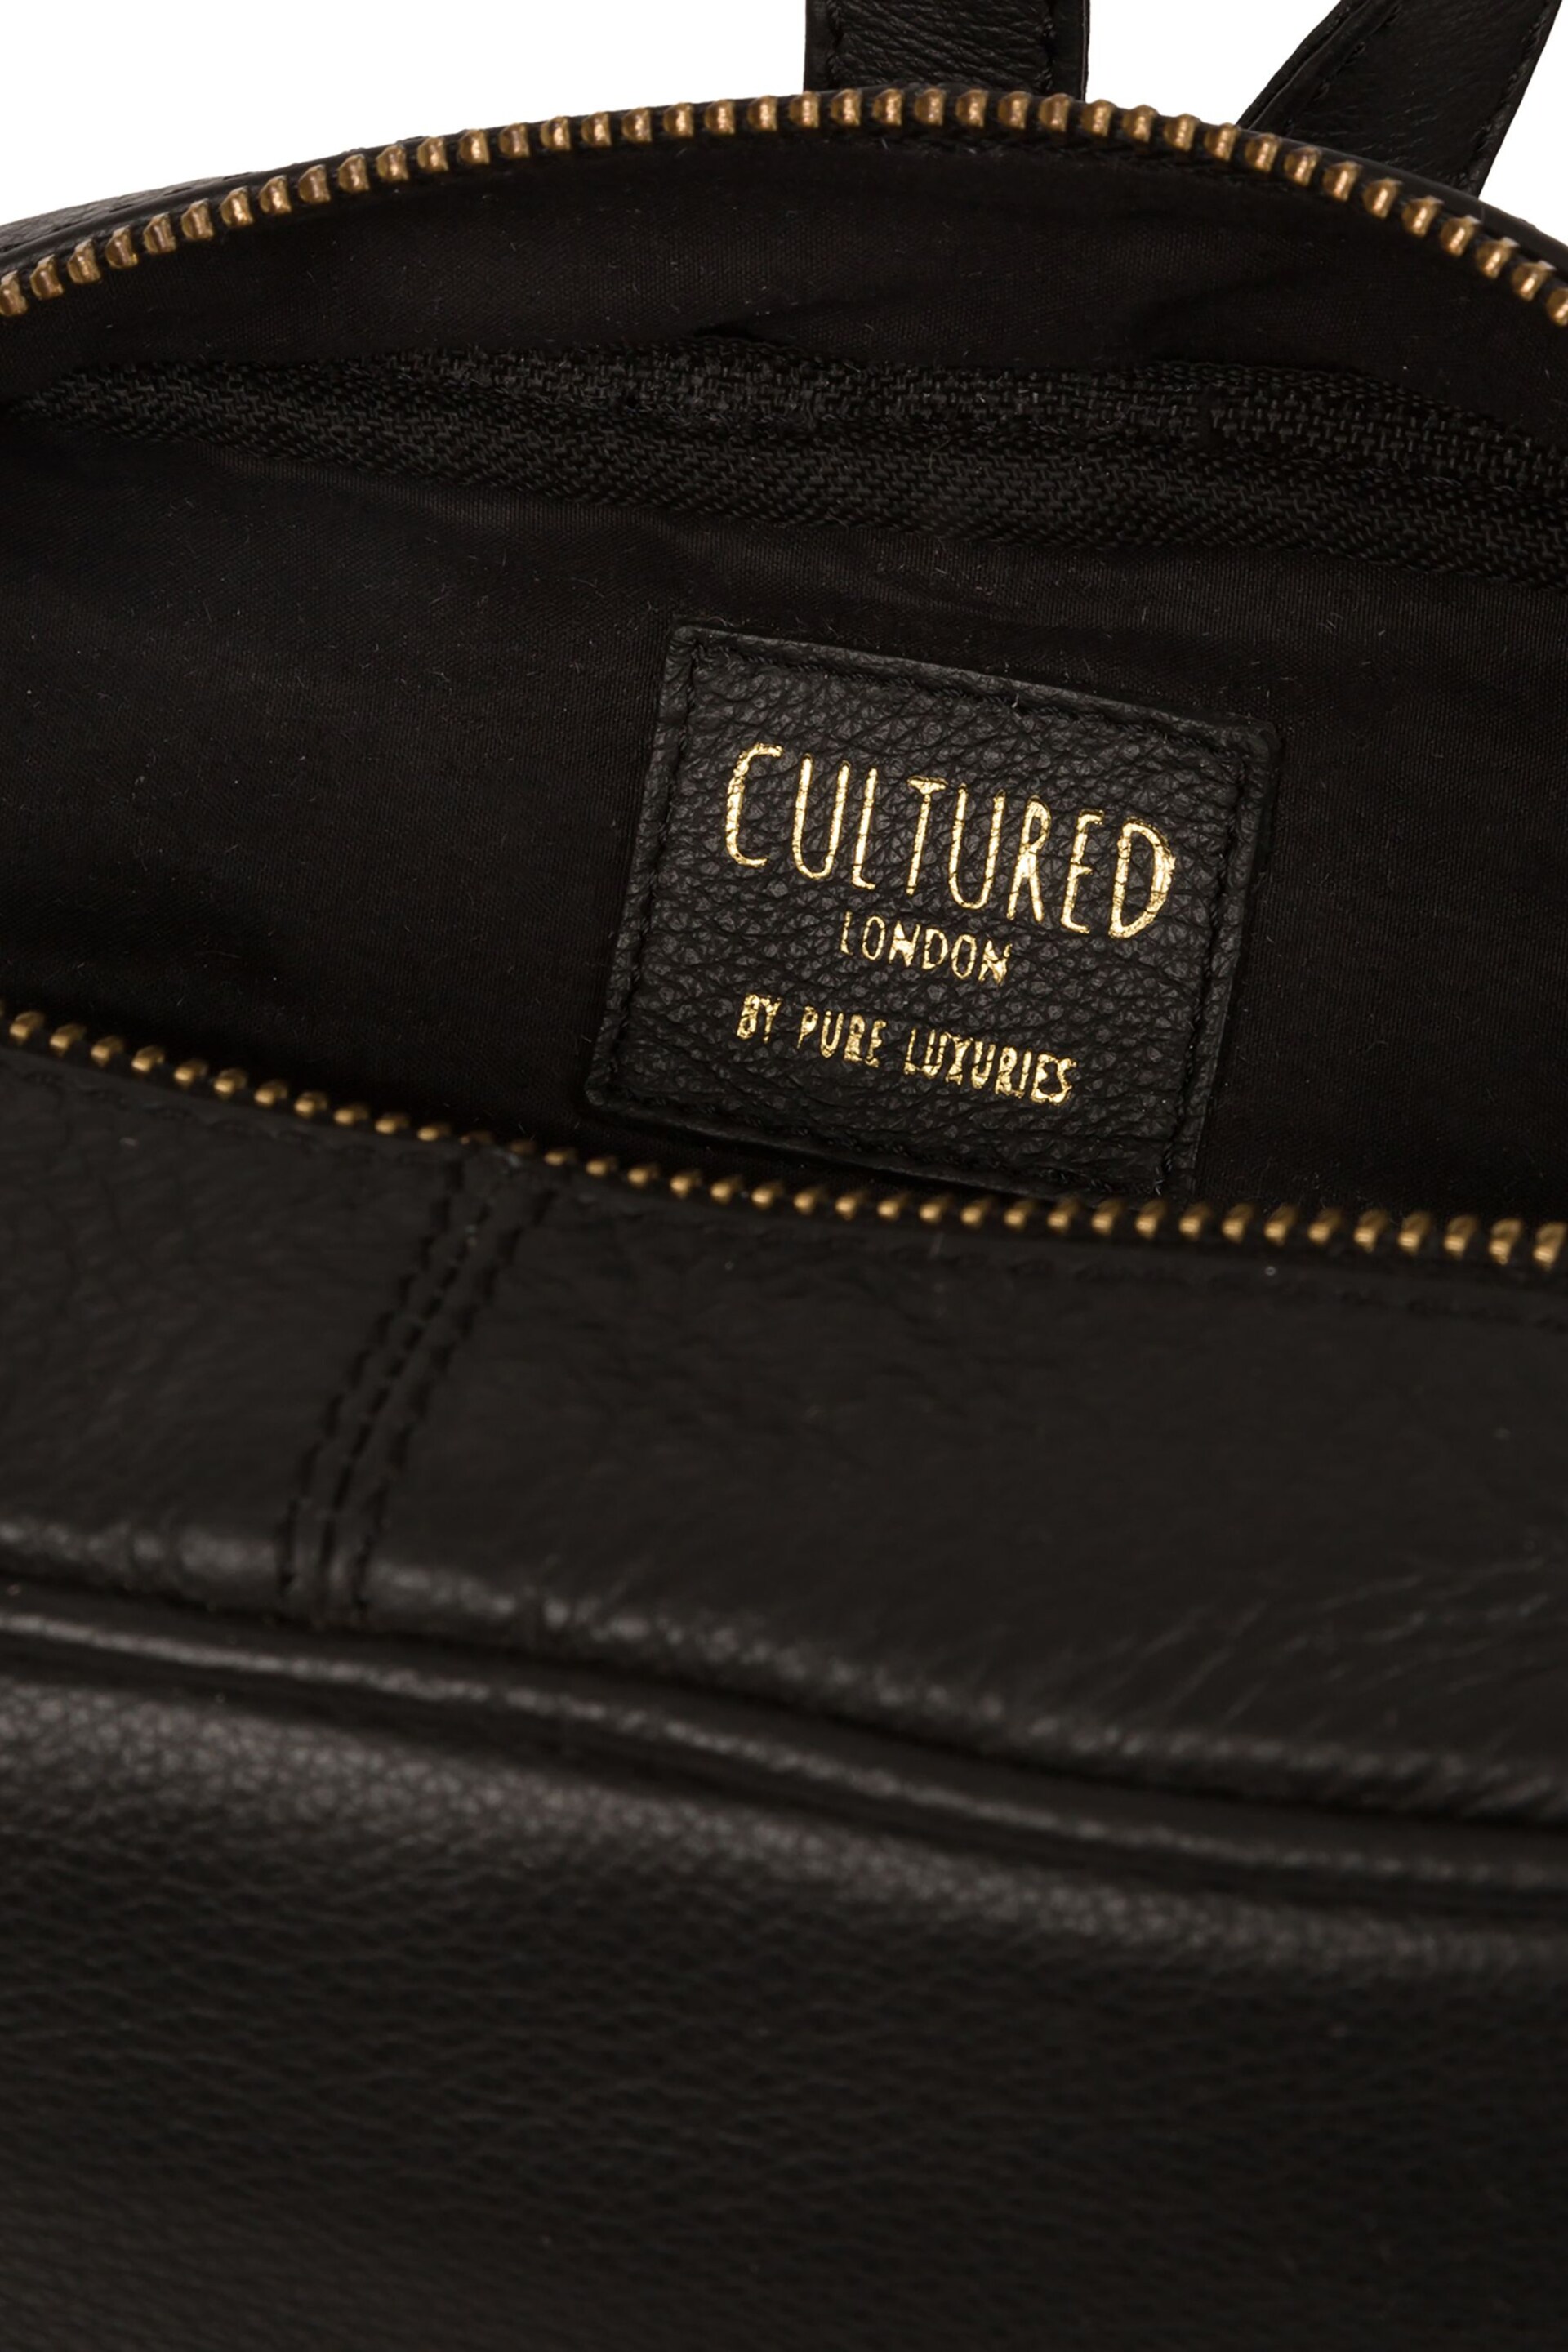 Cultured London Abbey Leather Backpack - Image 5 of 5